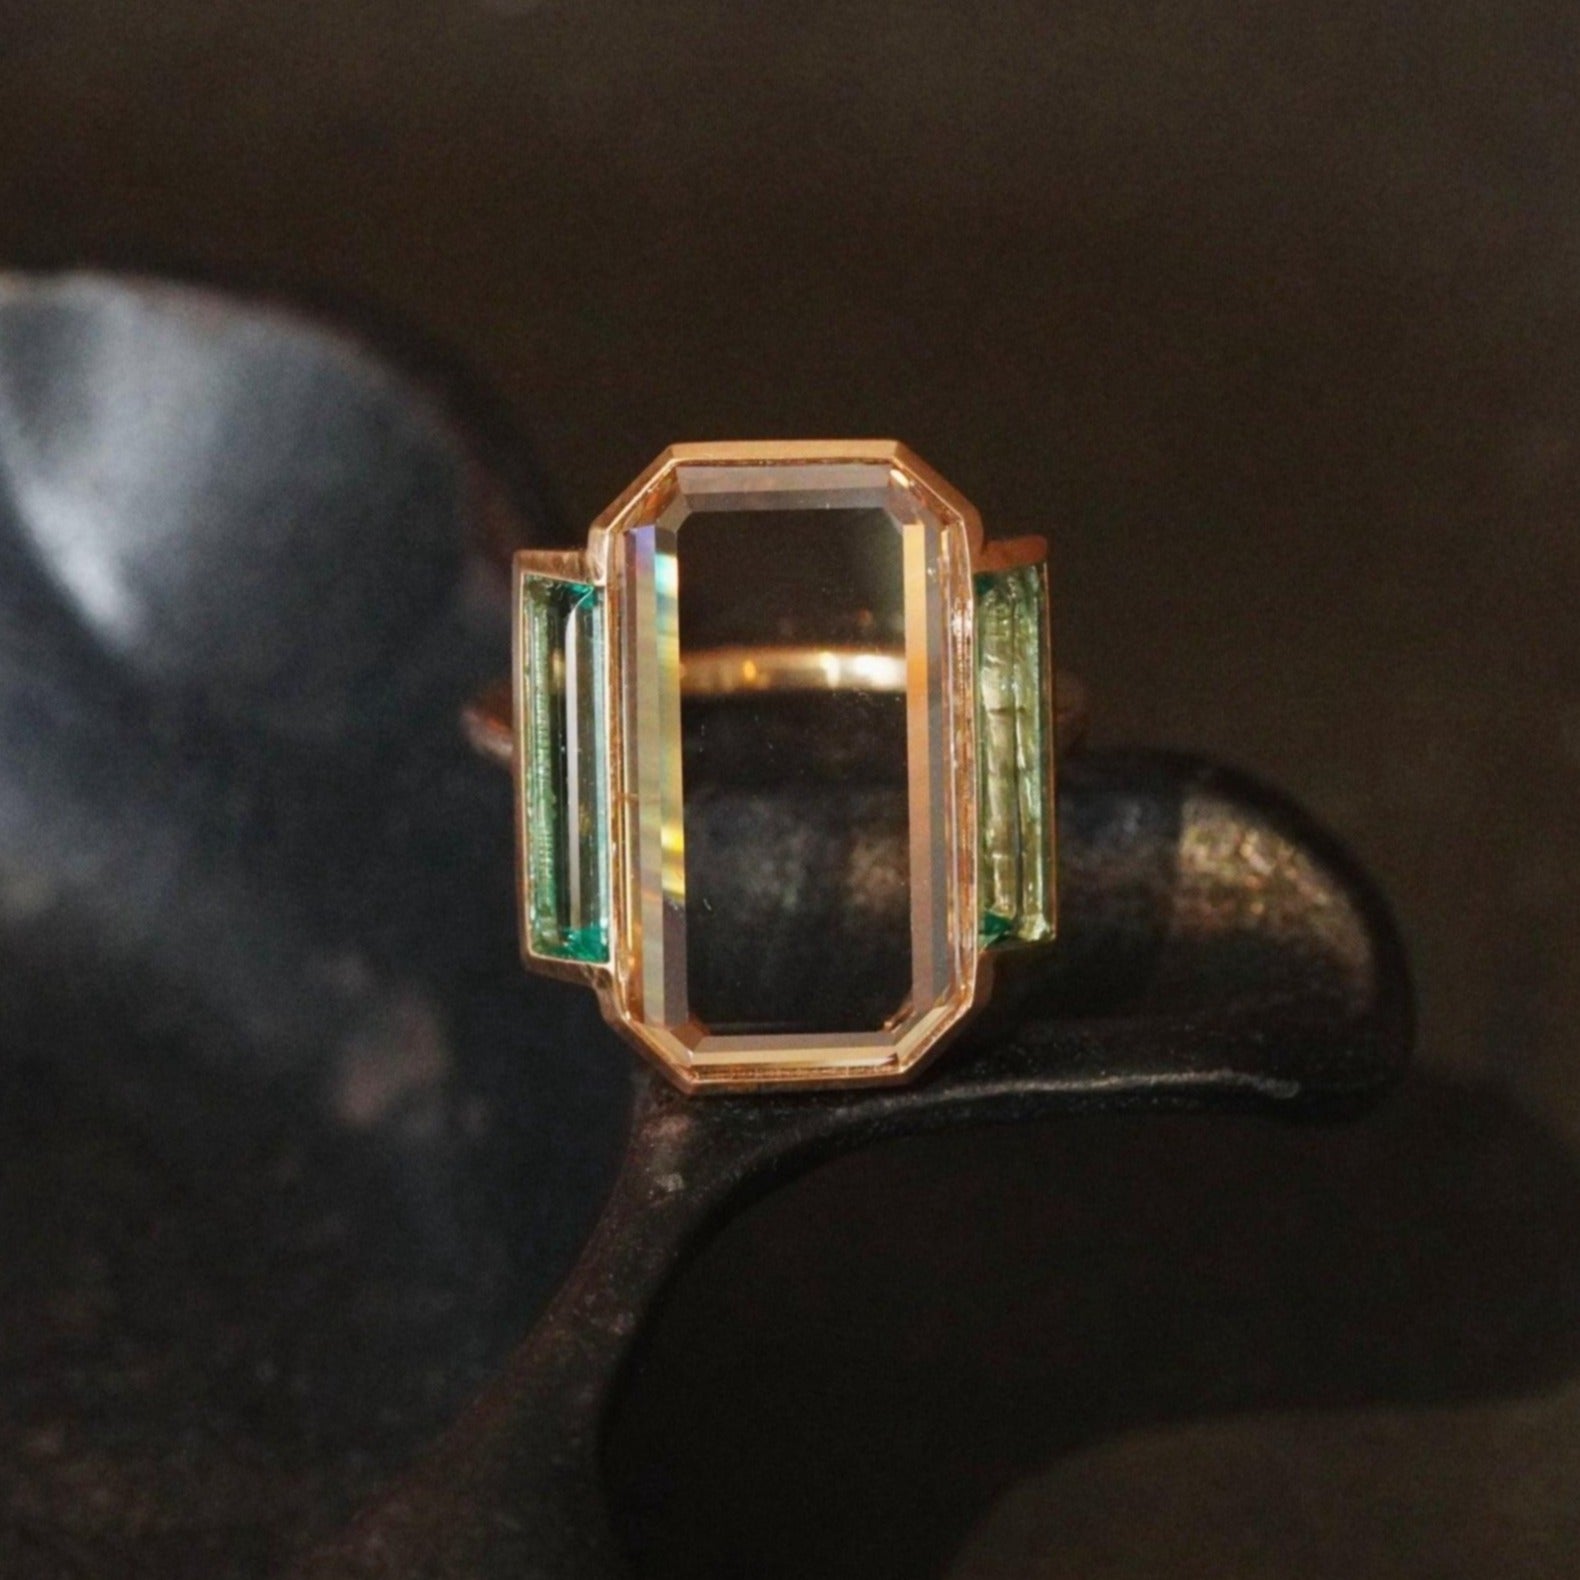 Deco-inspired portrait diamond ring with step cut emeralds in 20k rose gold